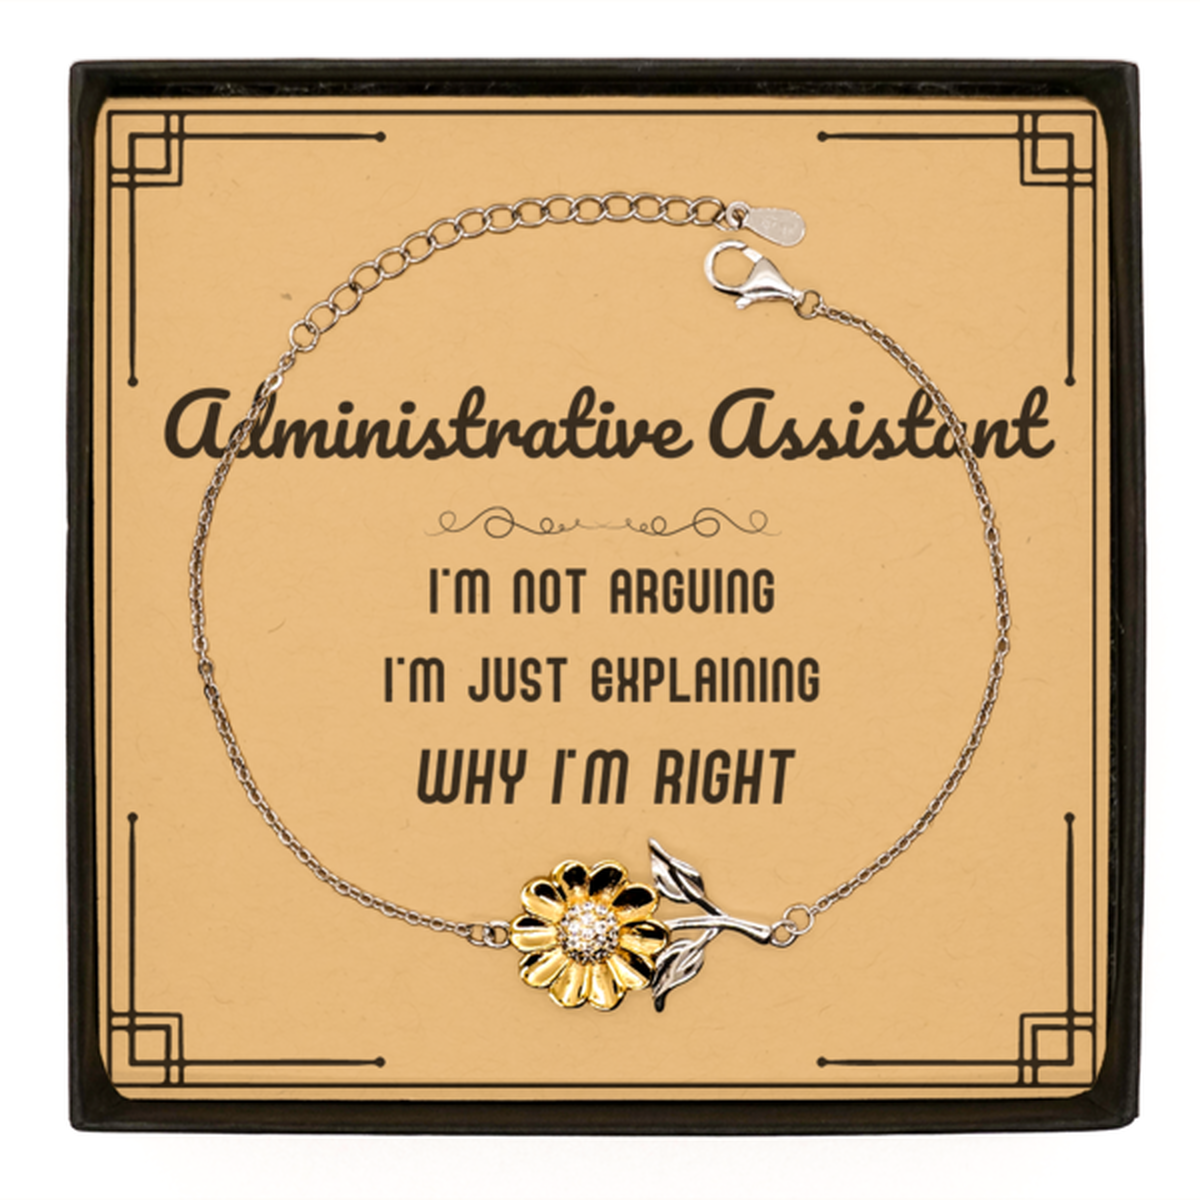 Administrative Assistant I'm not Arguing. I'm Just Explaining Why I'm RIGHT Sunflower Bracelet, Funny Saying Quote Administrative Assistant Gifts For Administrative Assistant Message Card Graduation Birthday Christmas Gifts for Men Women Coworker